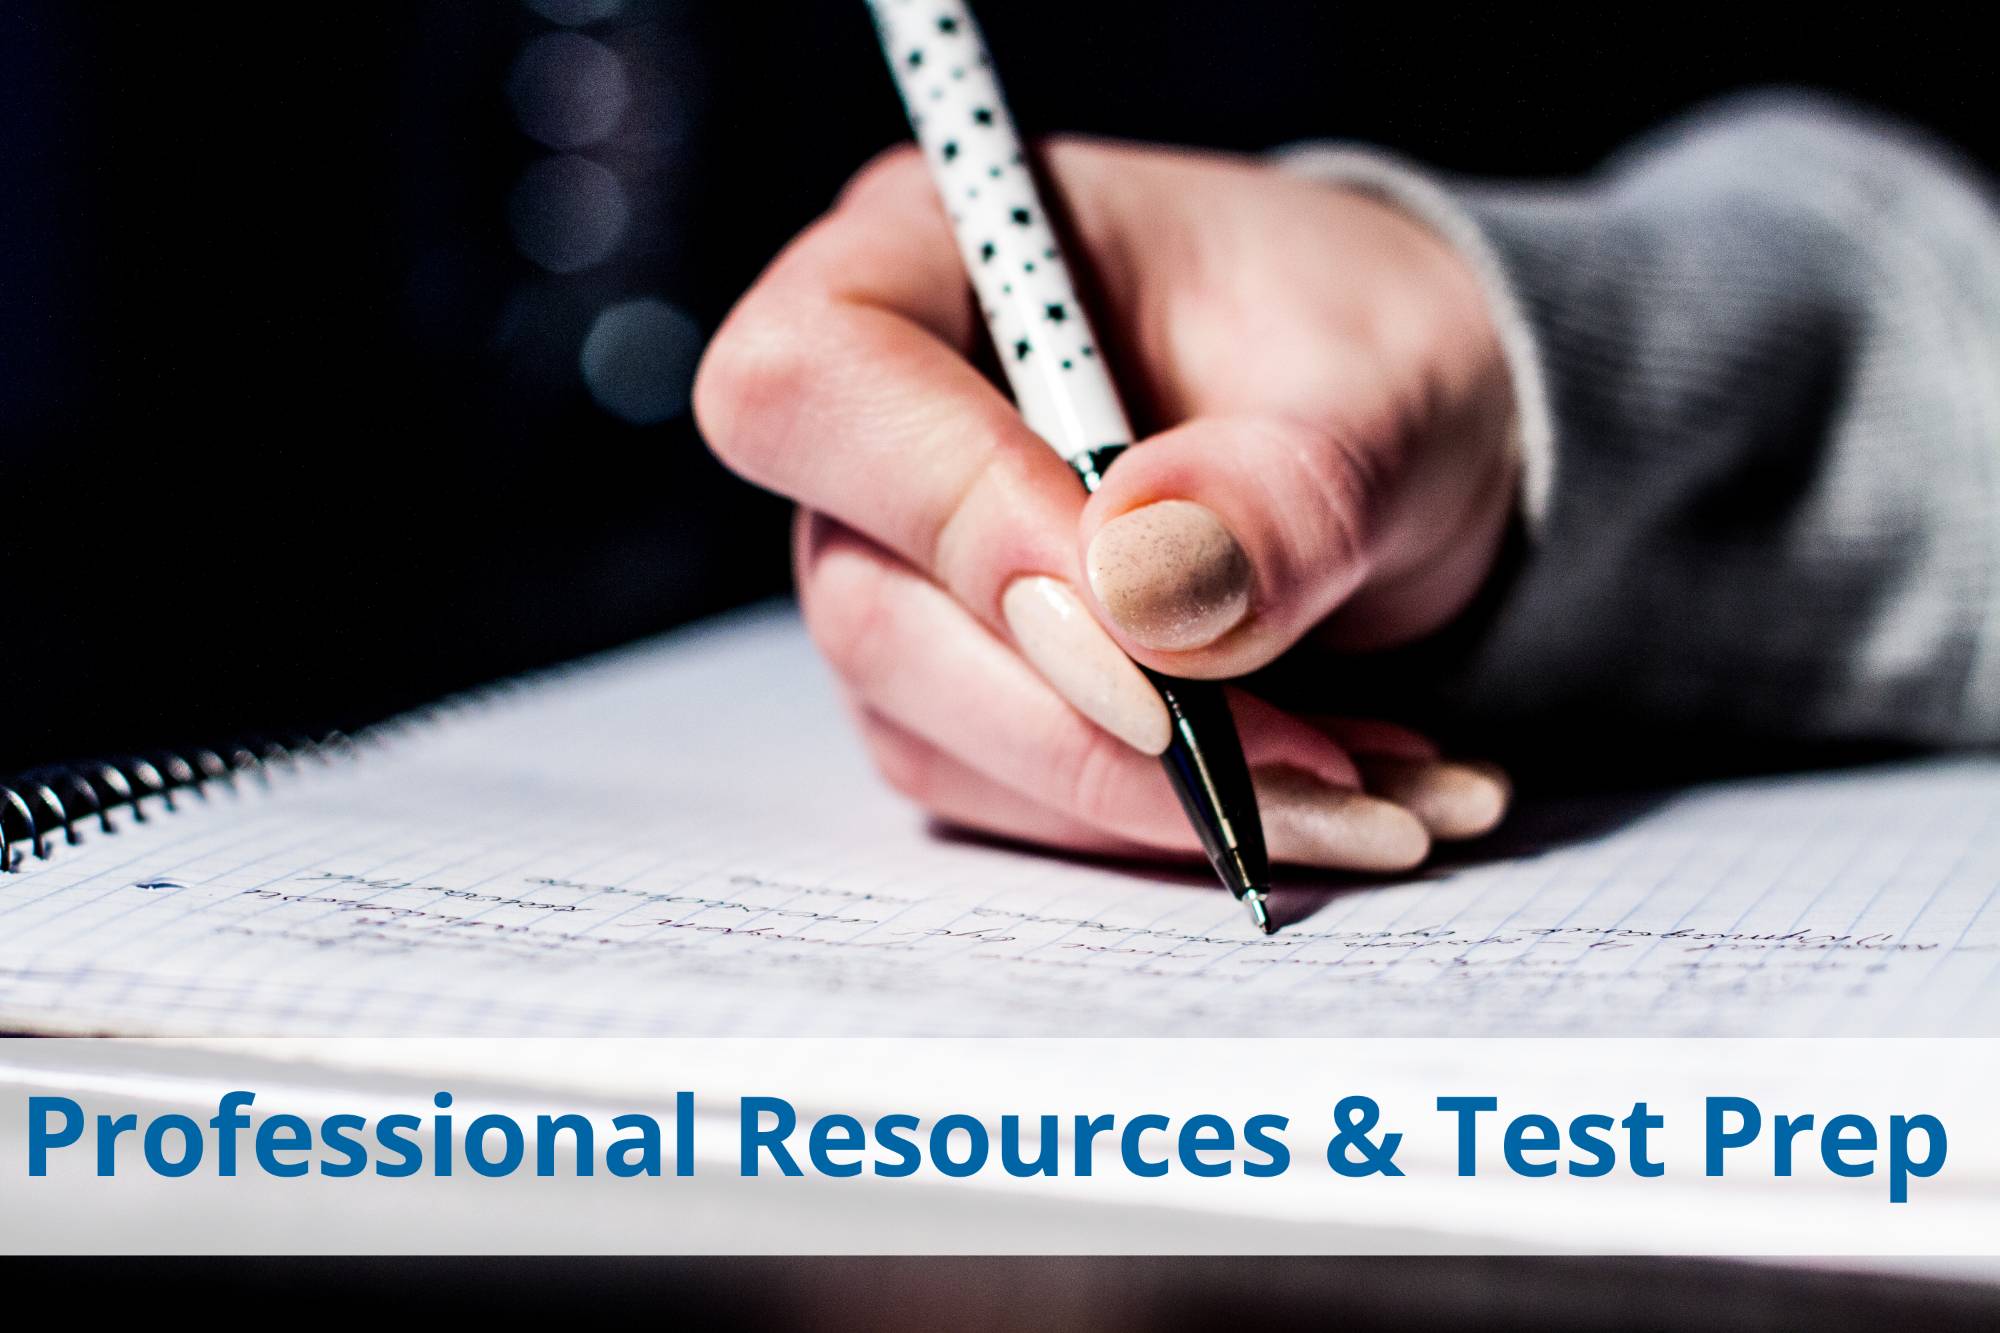 Professional resources and test prep